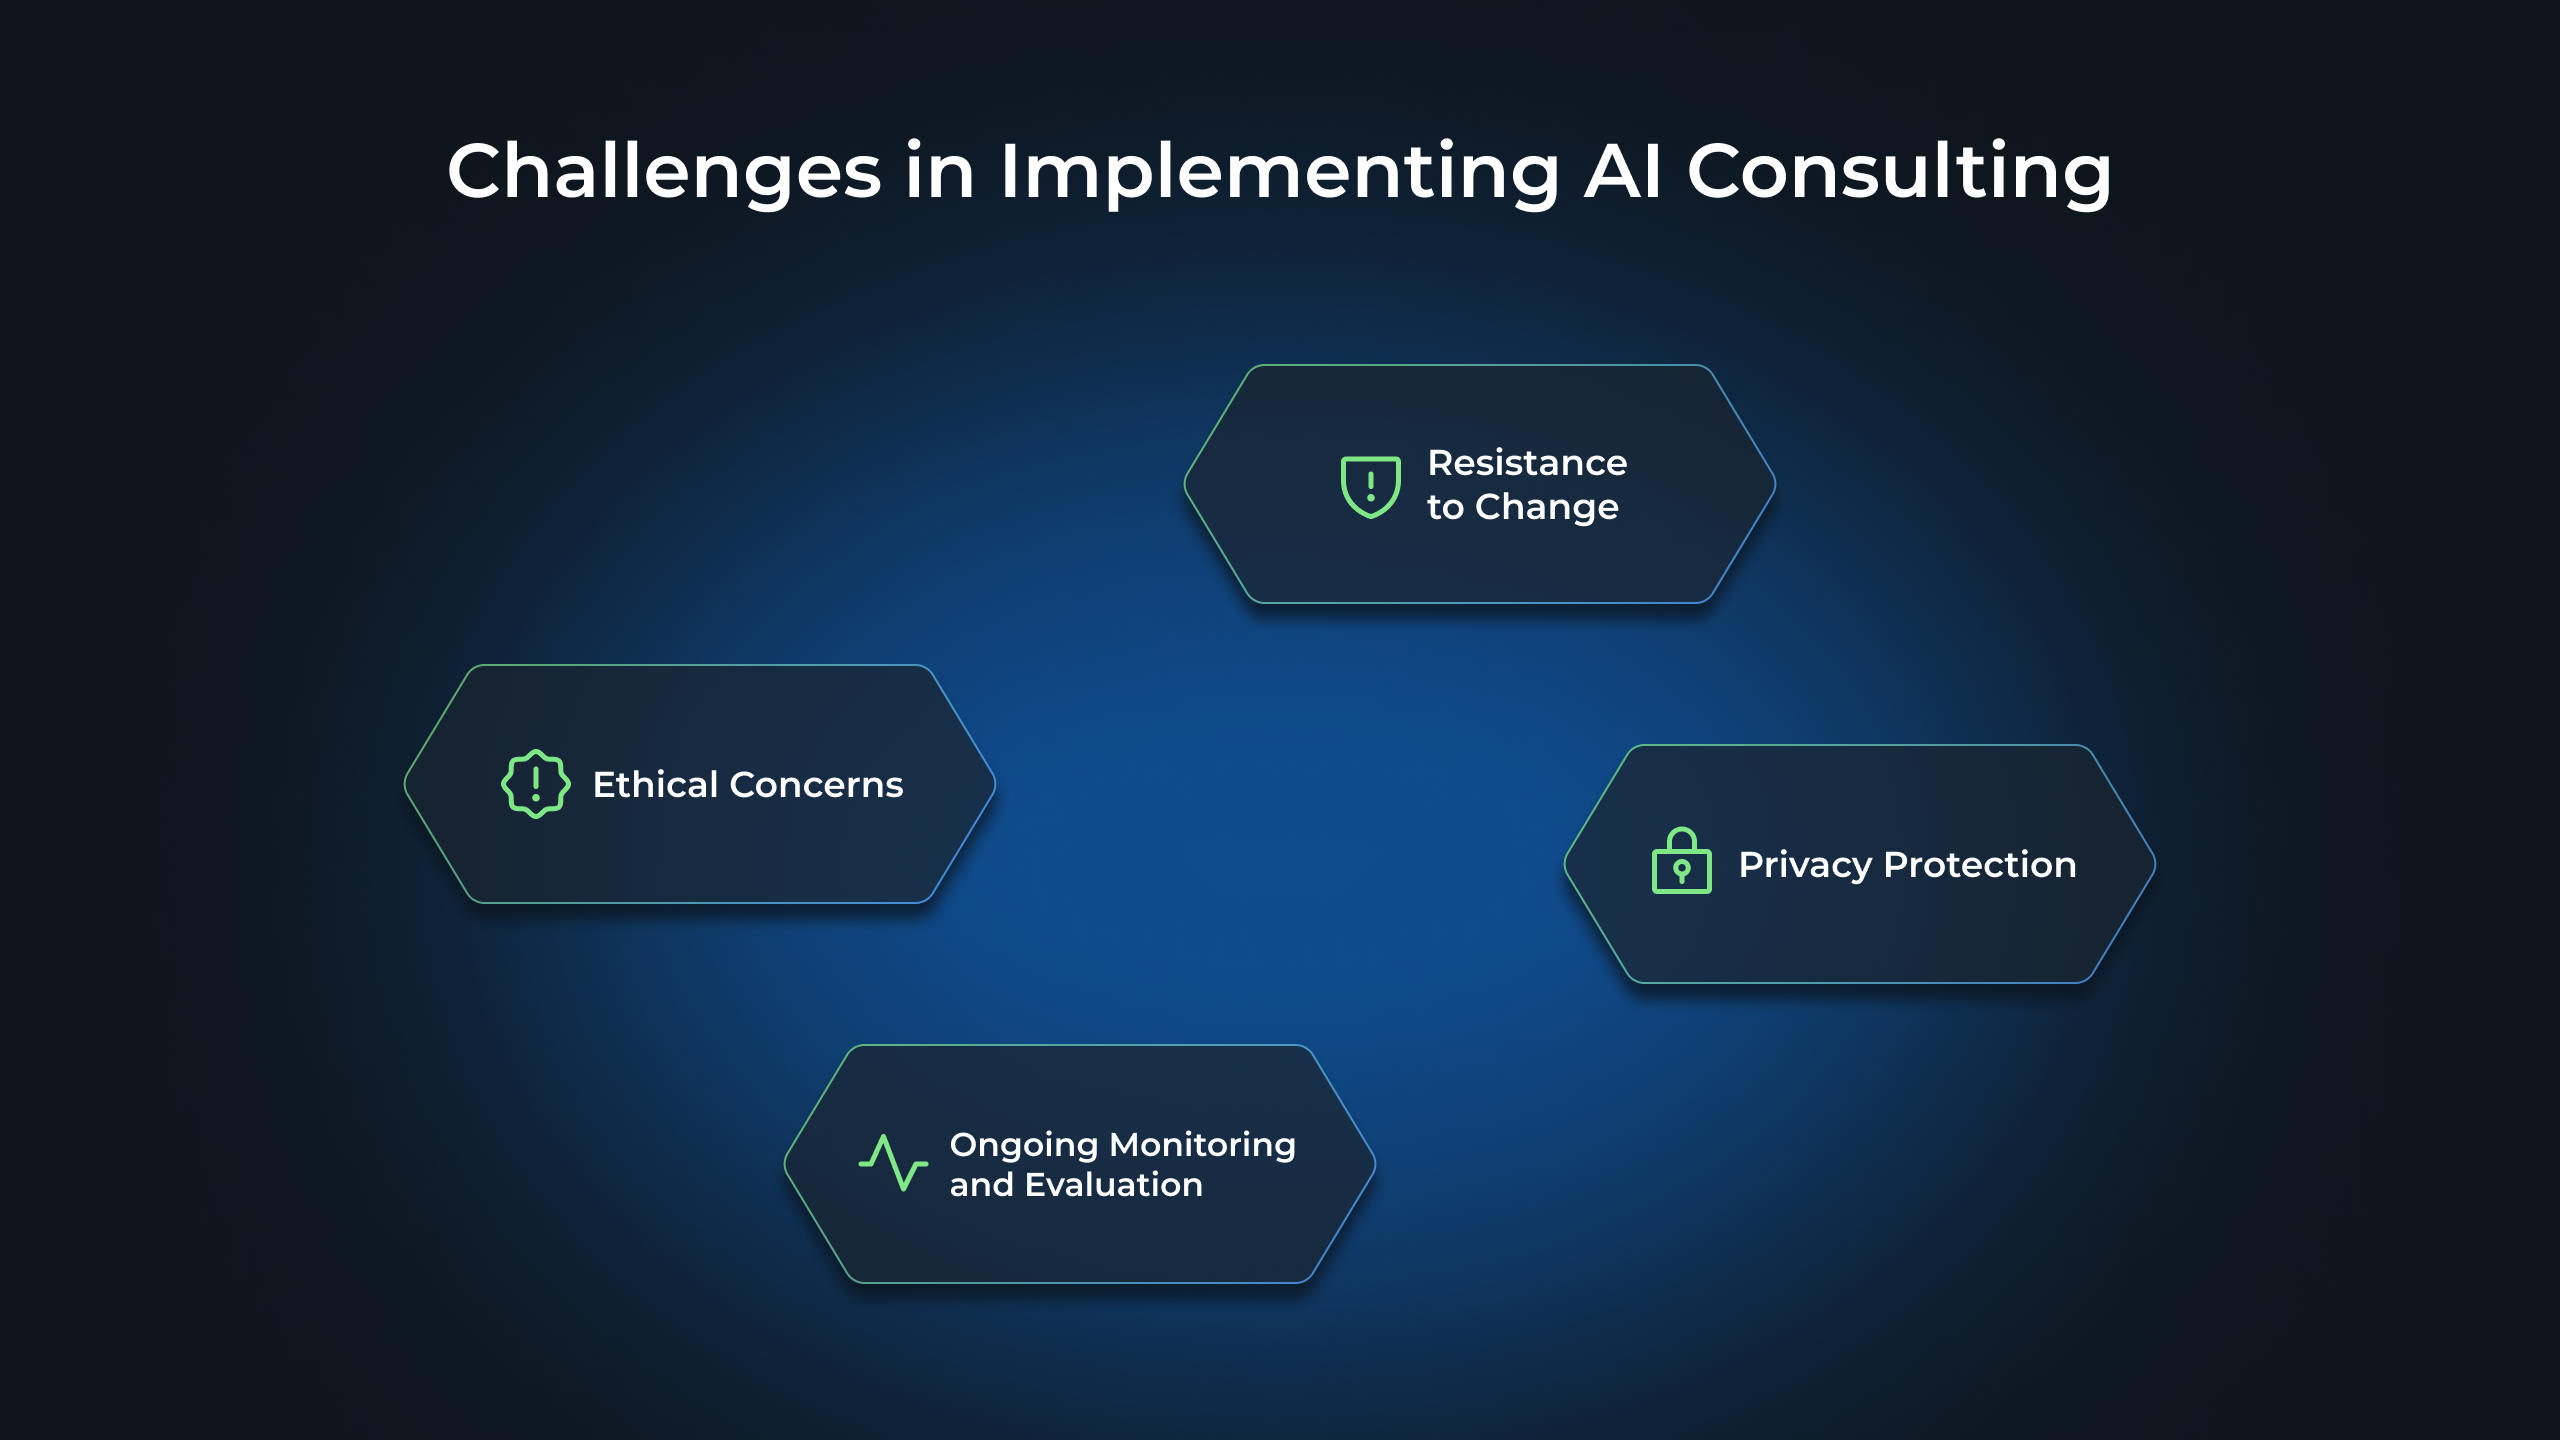 Challenges in Implementing AI Consulting: Resistance to Change, Ethical Concerns, Privacy Protection, Ongoing Monitoring and Evaluation
